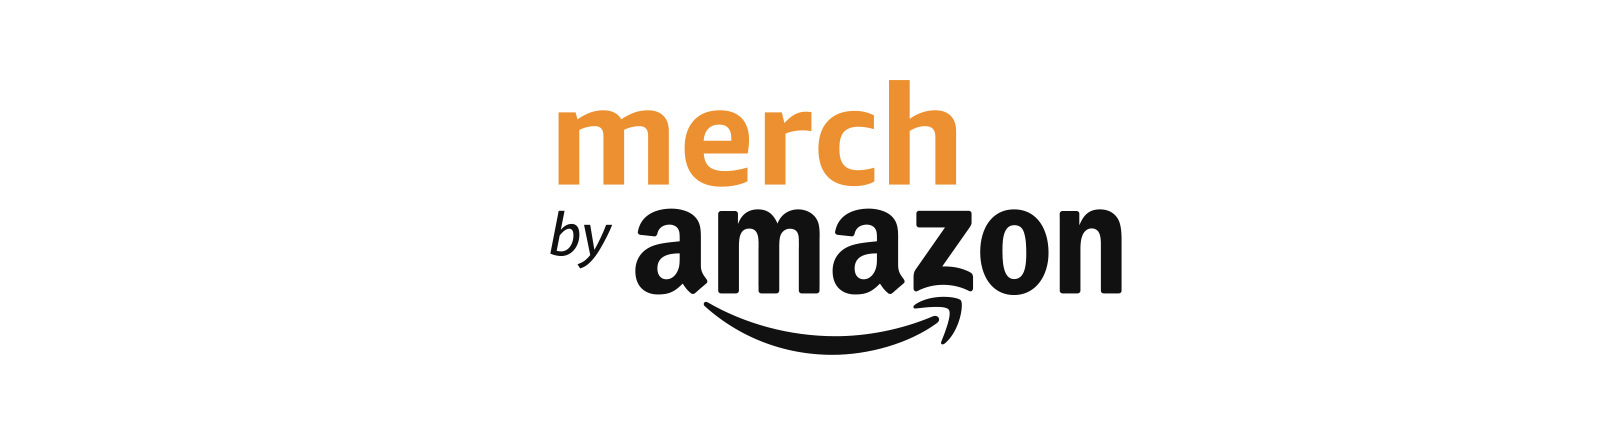 Merch by Amazon Cover